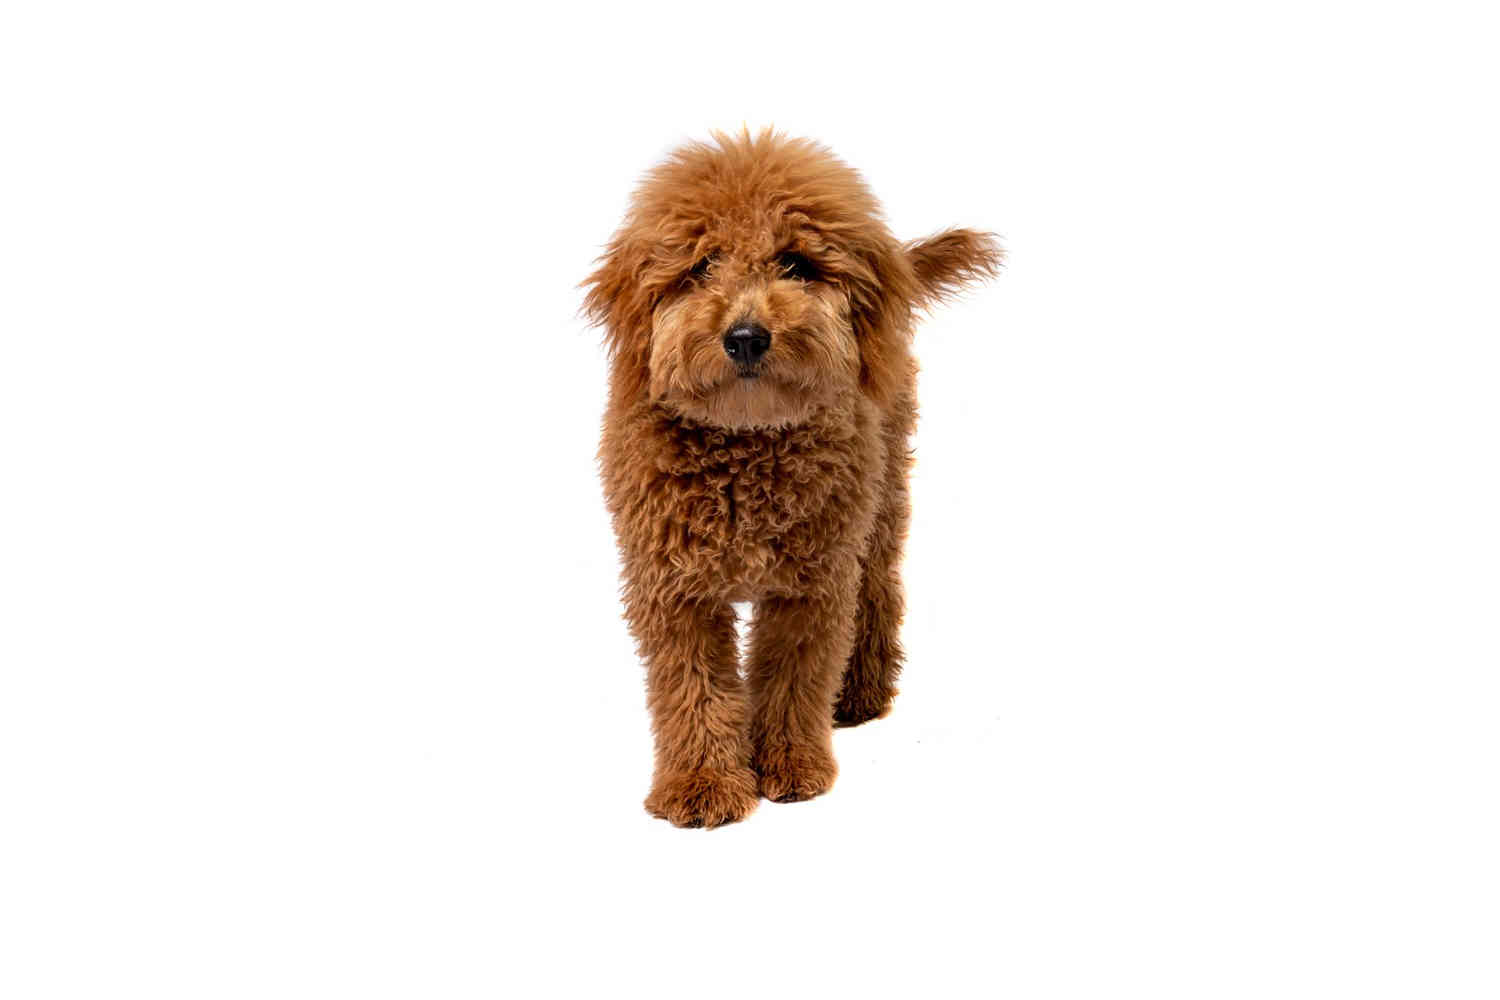 Top Tips for Managing Your Goldendoodle's Fear of Other Dogs